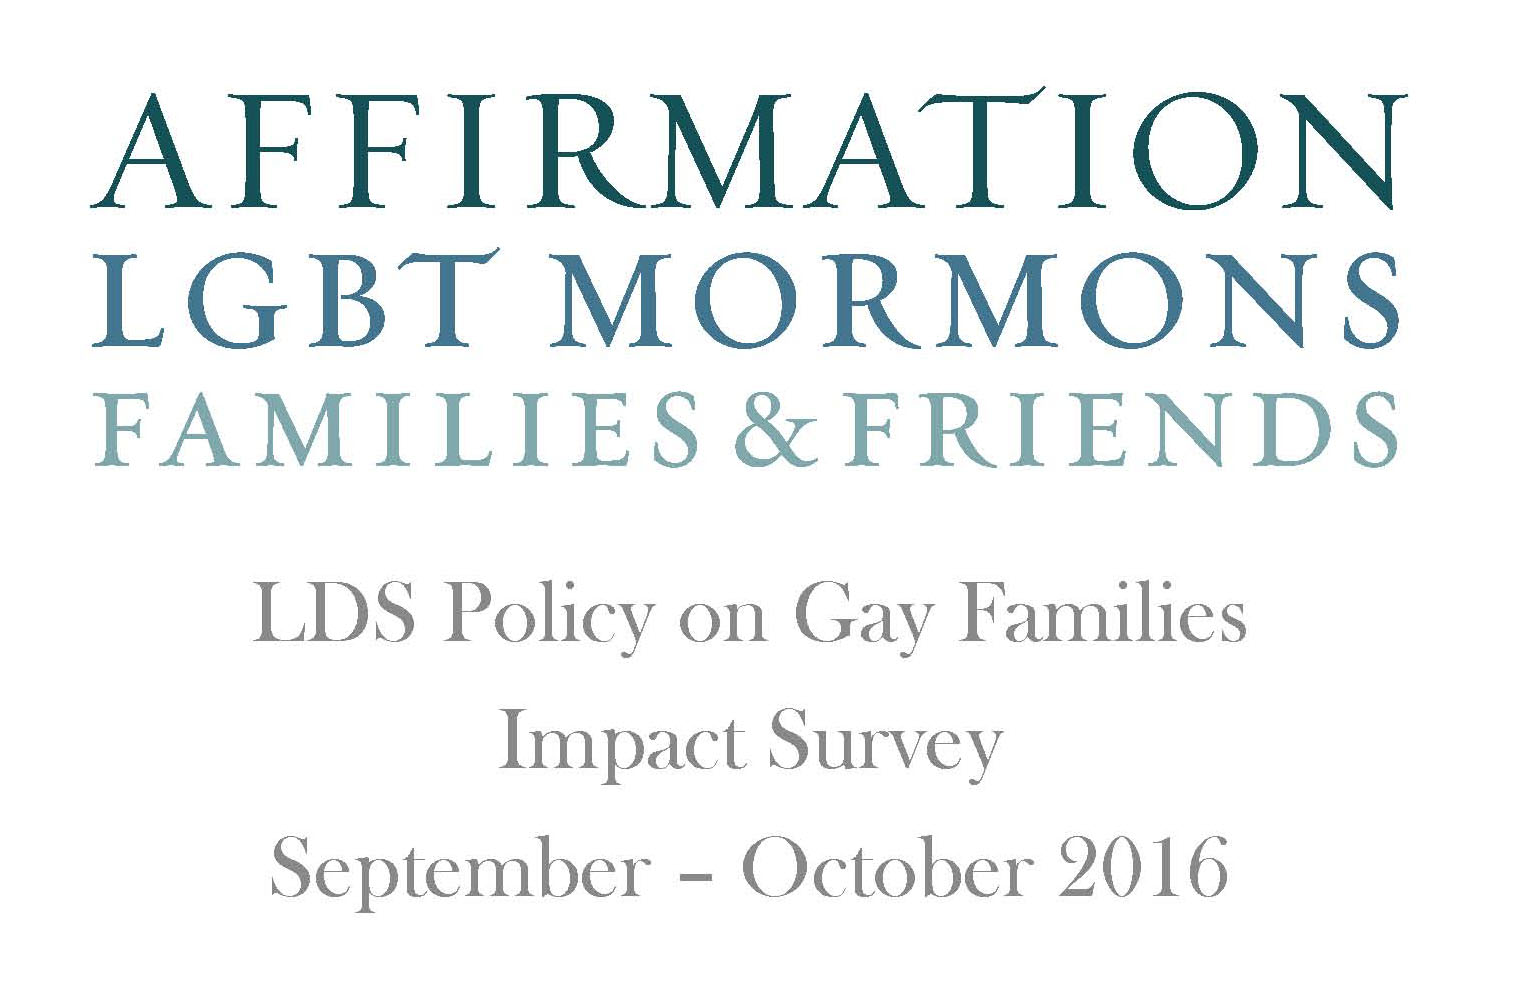 Results Of The Affirmation Survey On The Impact Of The Lds Policy On Gay Families